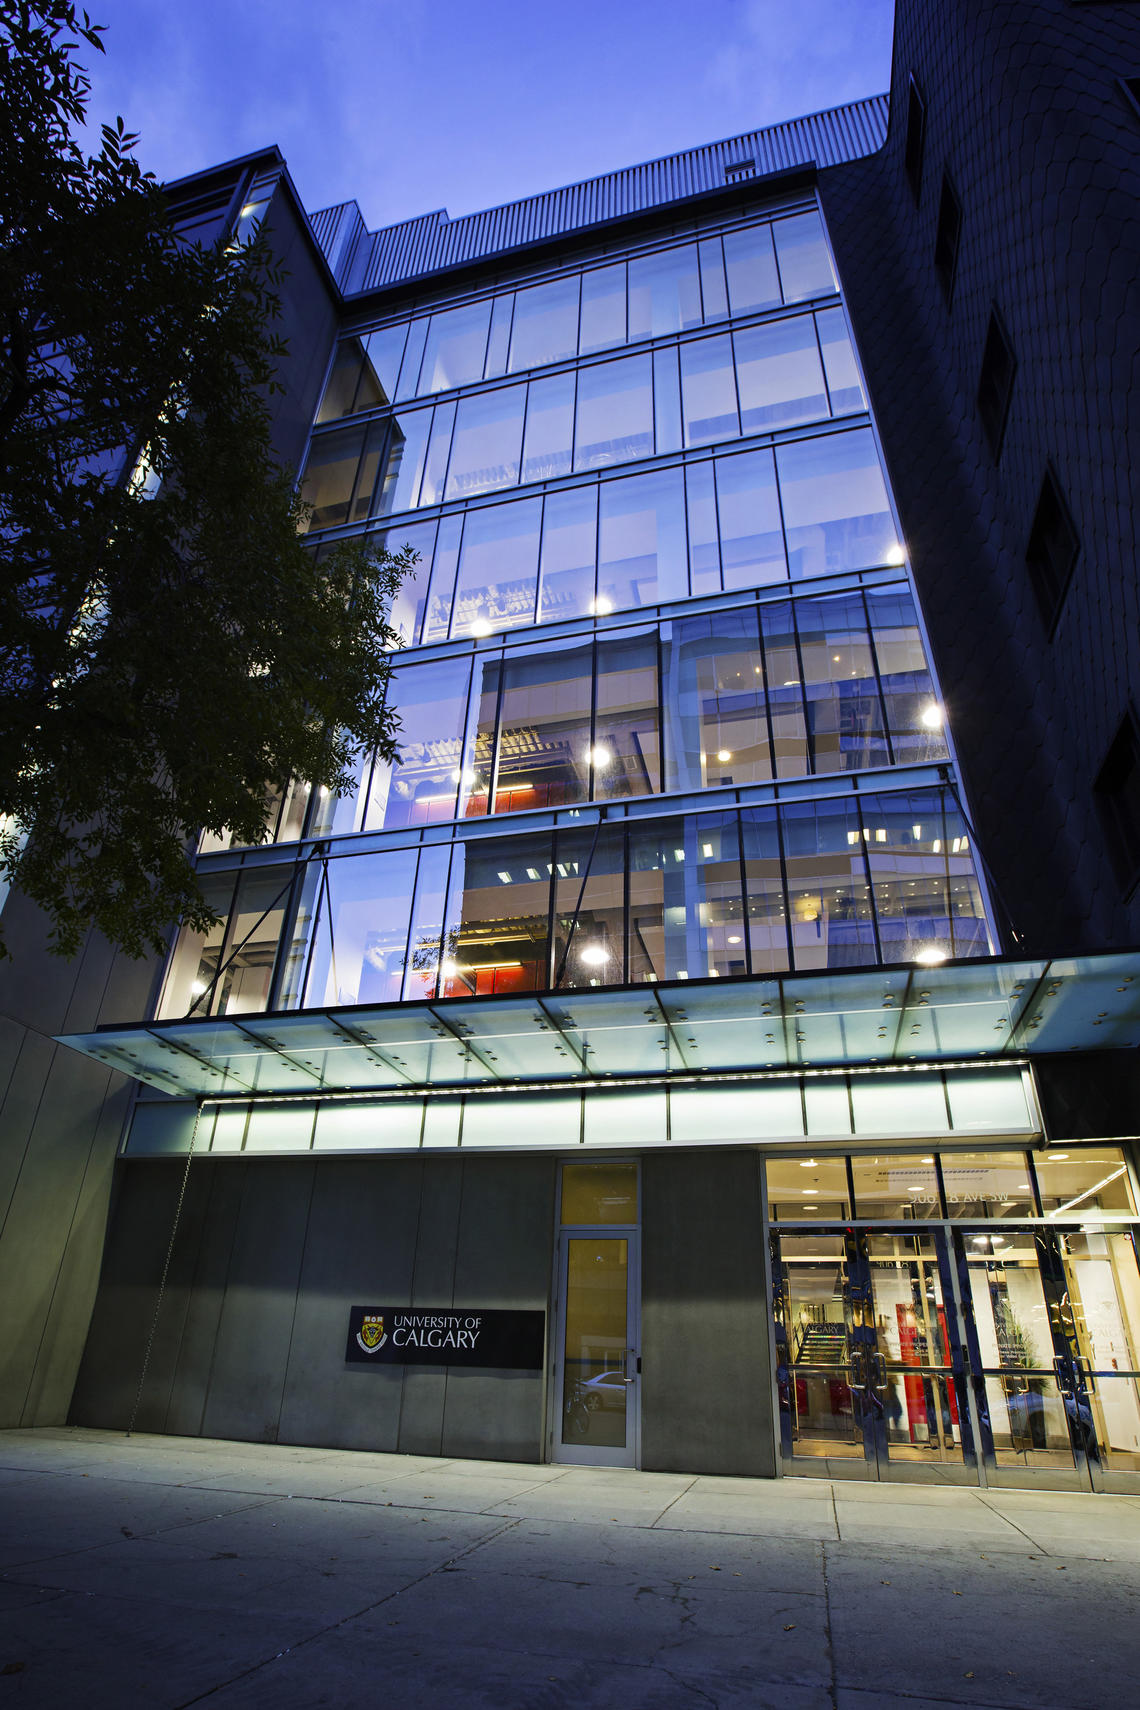 exterior of UCalgary's downtown campus at night